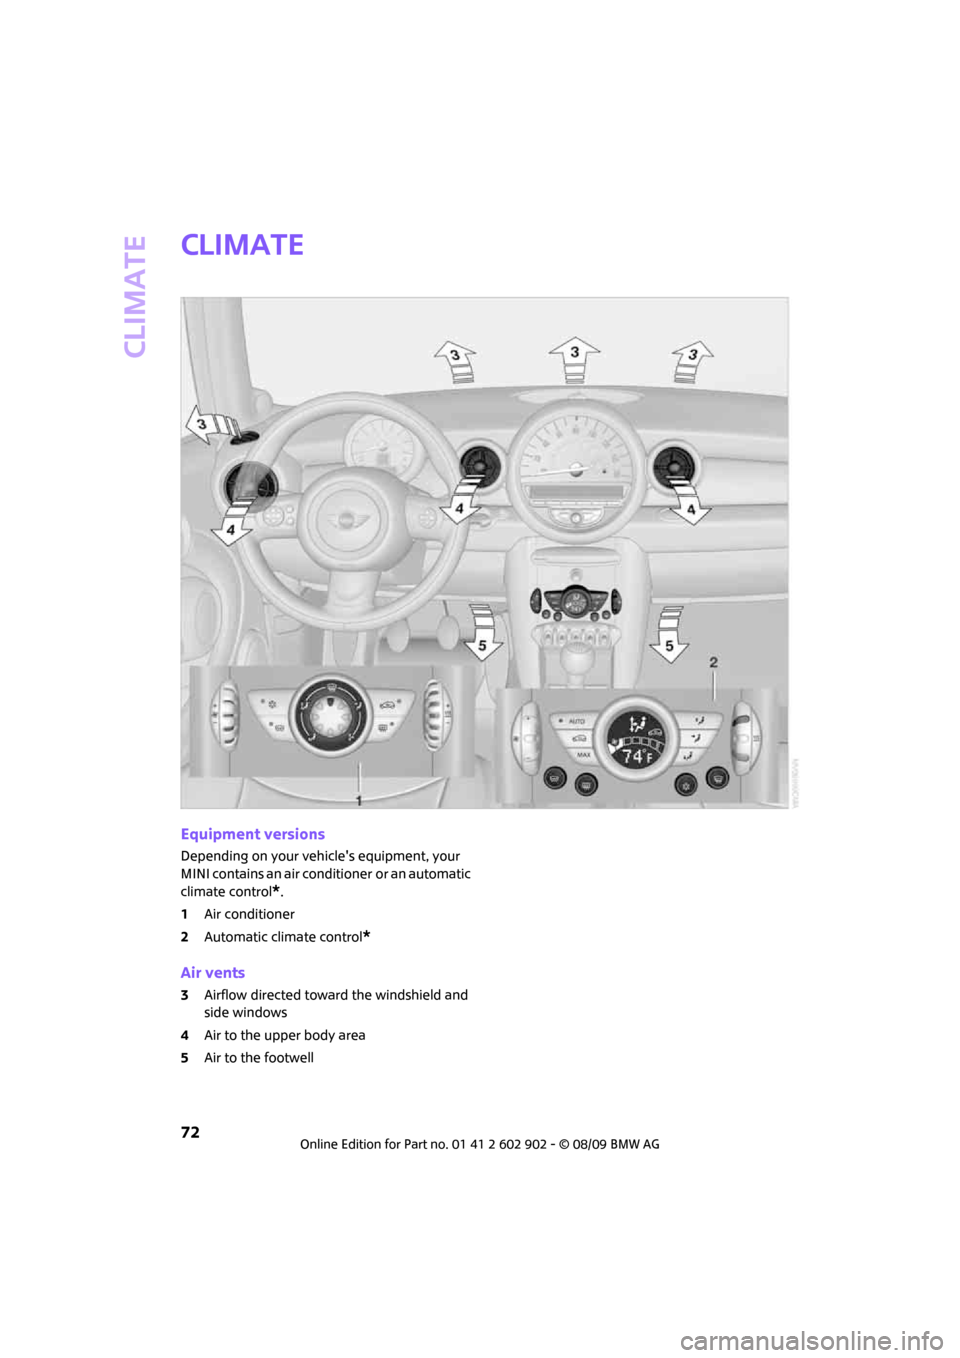 MINI Clubman 2010 Manual PDF Climate
72
Climate
Equipment versions
Depending on your vehicles equipment, your 
MINI contains an air conditioner
 or an automatic 
climate control
*.
1Air conditioner
2Automatic climate control
*
A